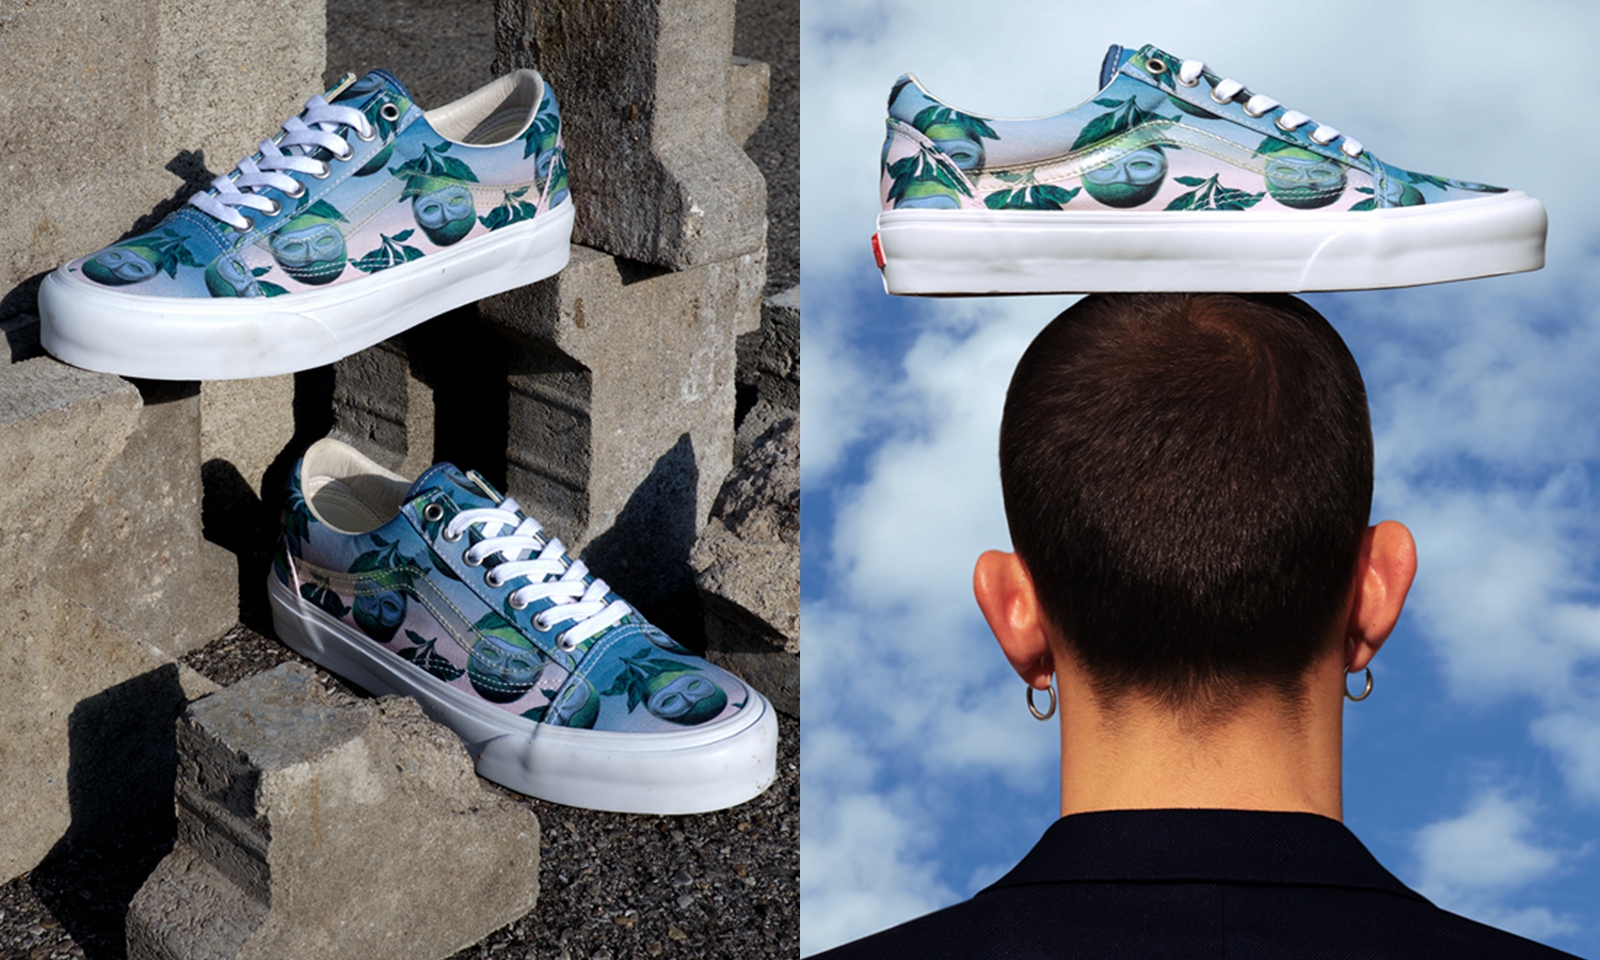 OPENING CEREMONY x The Magritte Foundation x Vans 三方联名公开